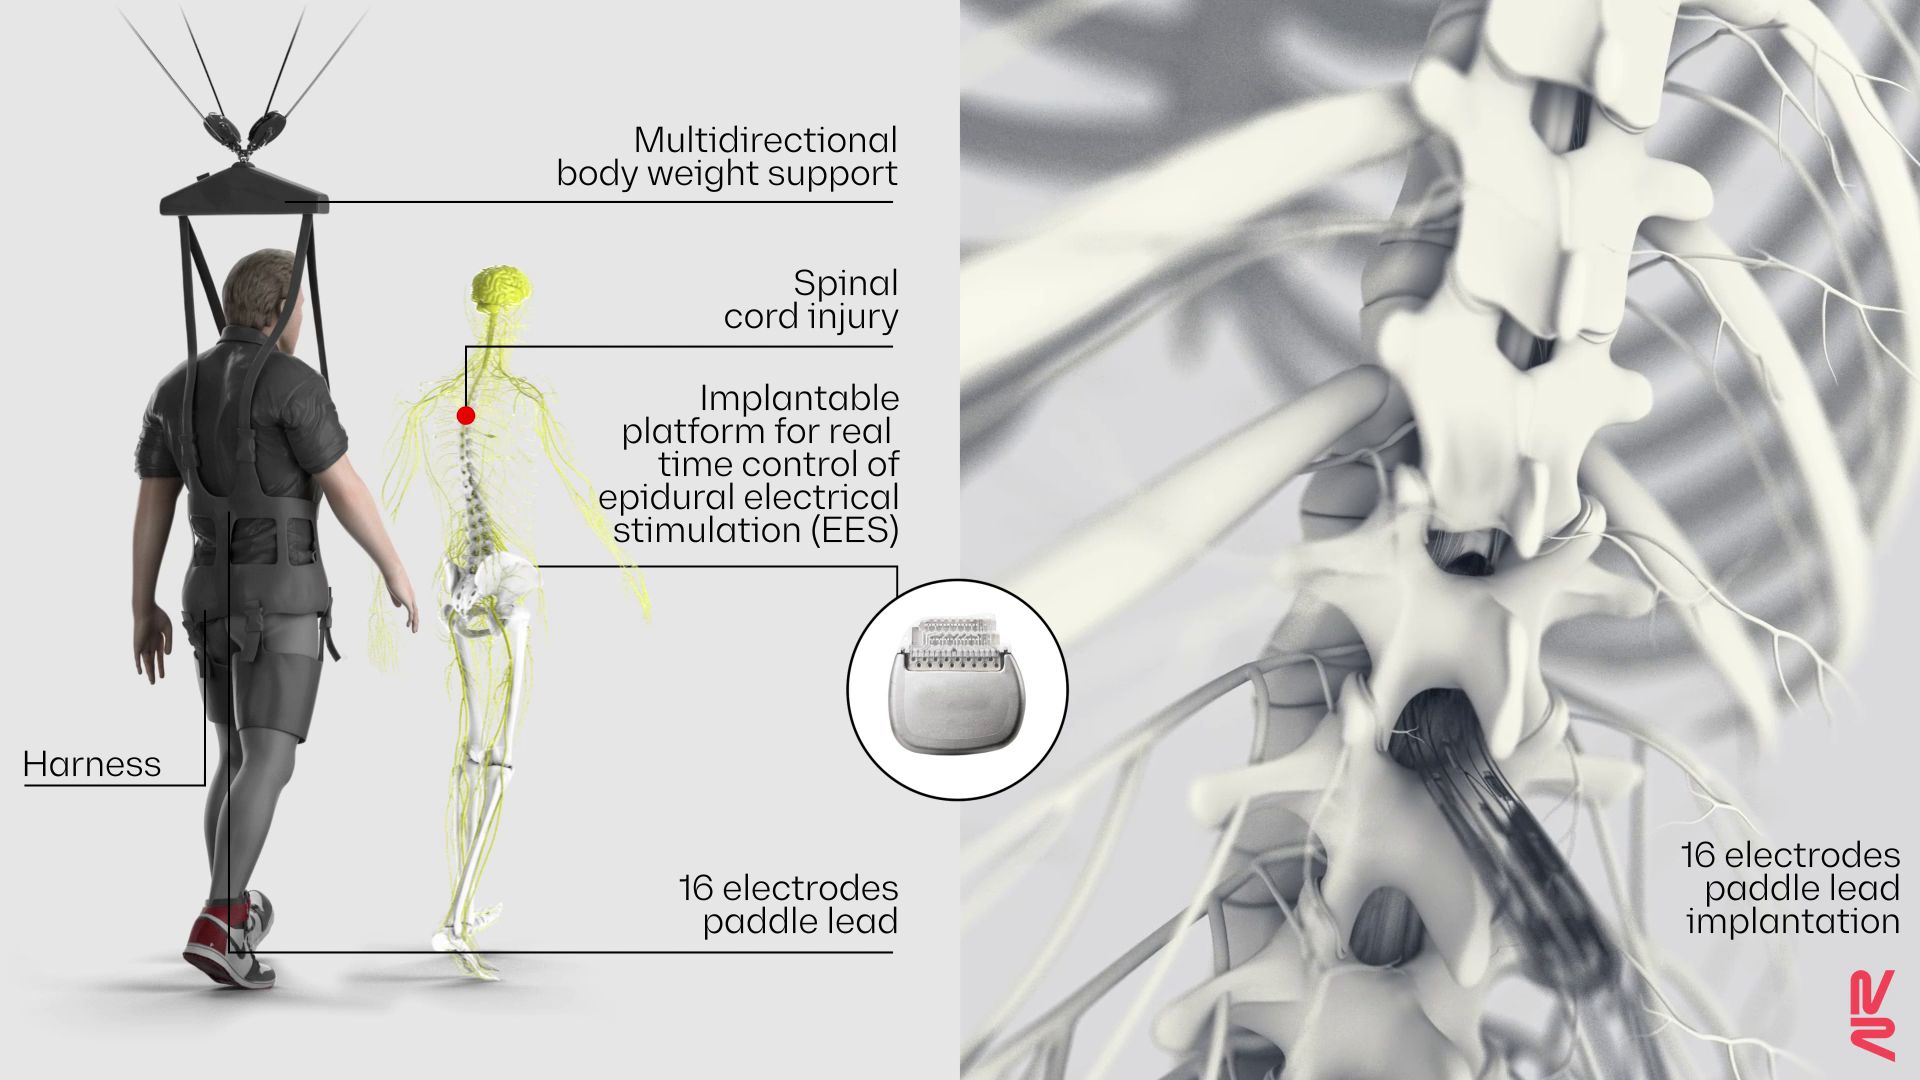 diagram shows a person in a weight-bearing harness next to an illustration of their nervous system, with an electrode-loaded device implanted on the lower spinal cord